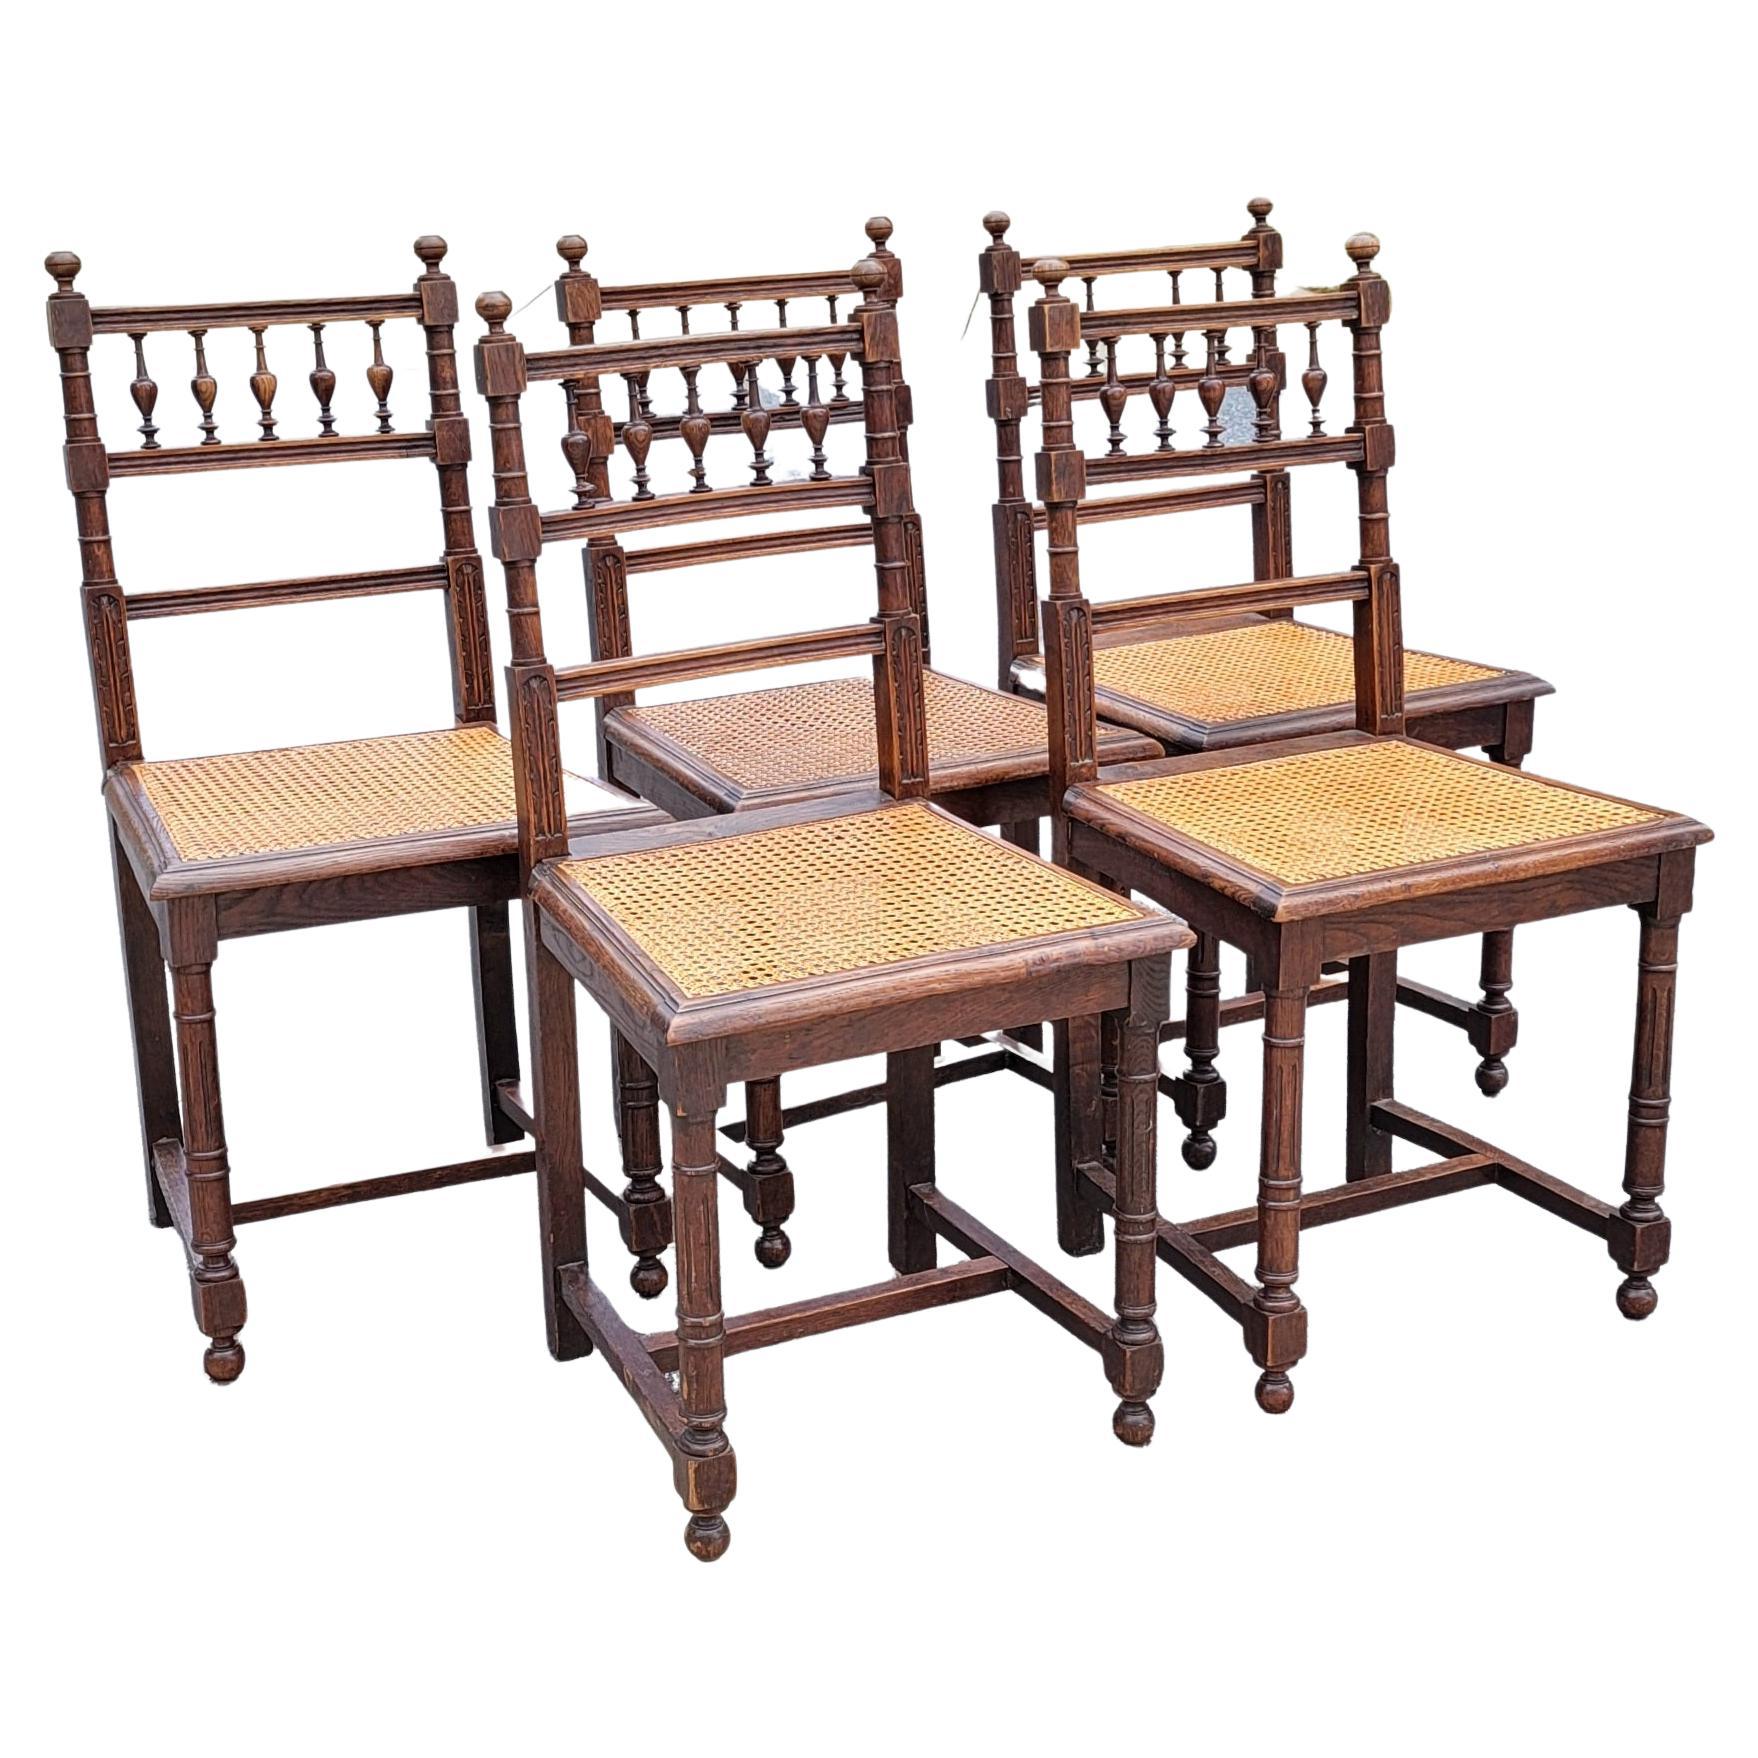 Set of 5 Early 20th C. French Henry II Oak and Canned Seat Dining Chairs In Good Condition For Sale In Germantown, MD